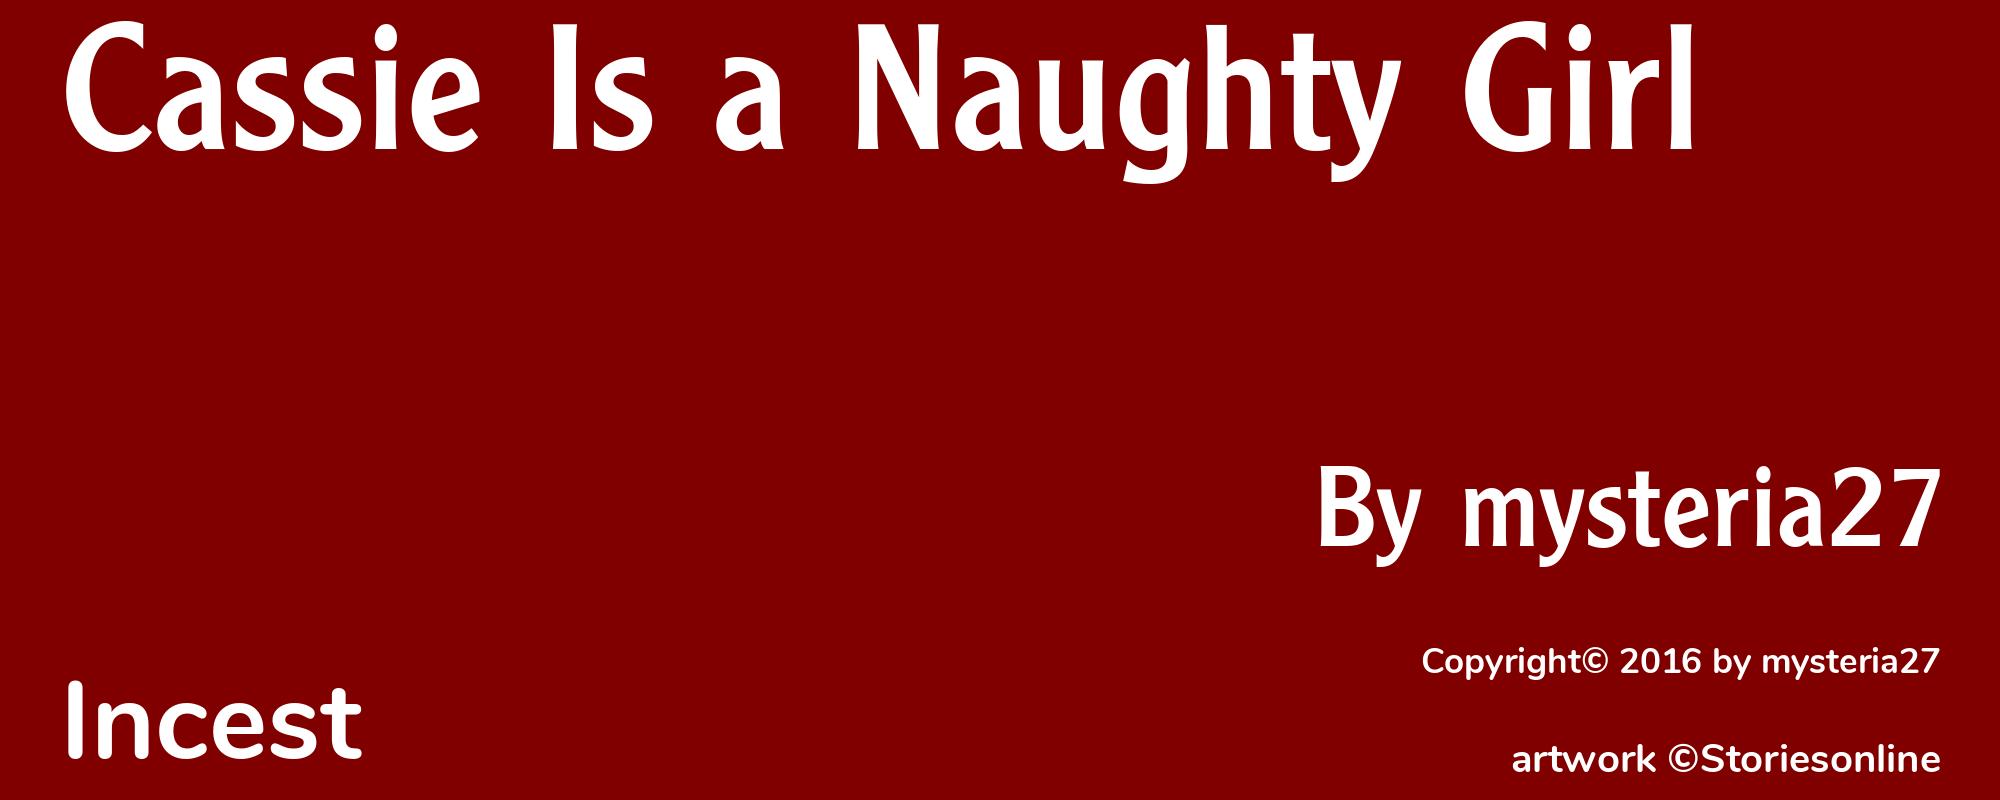 Cassie Is a Naughty Girl - Cover